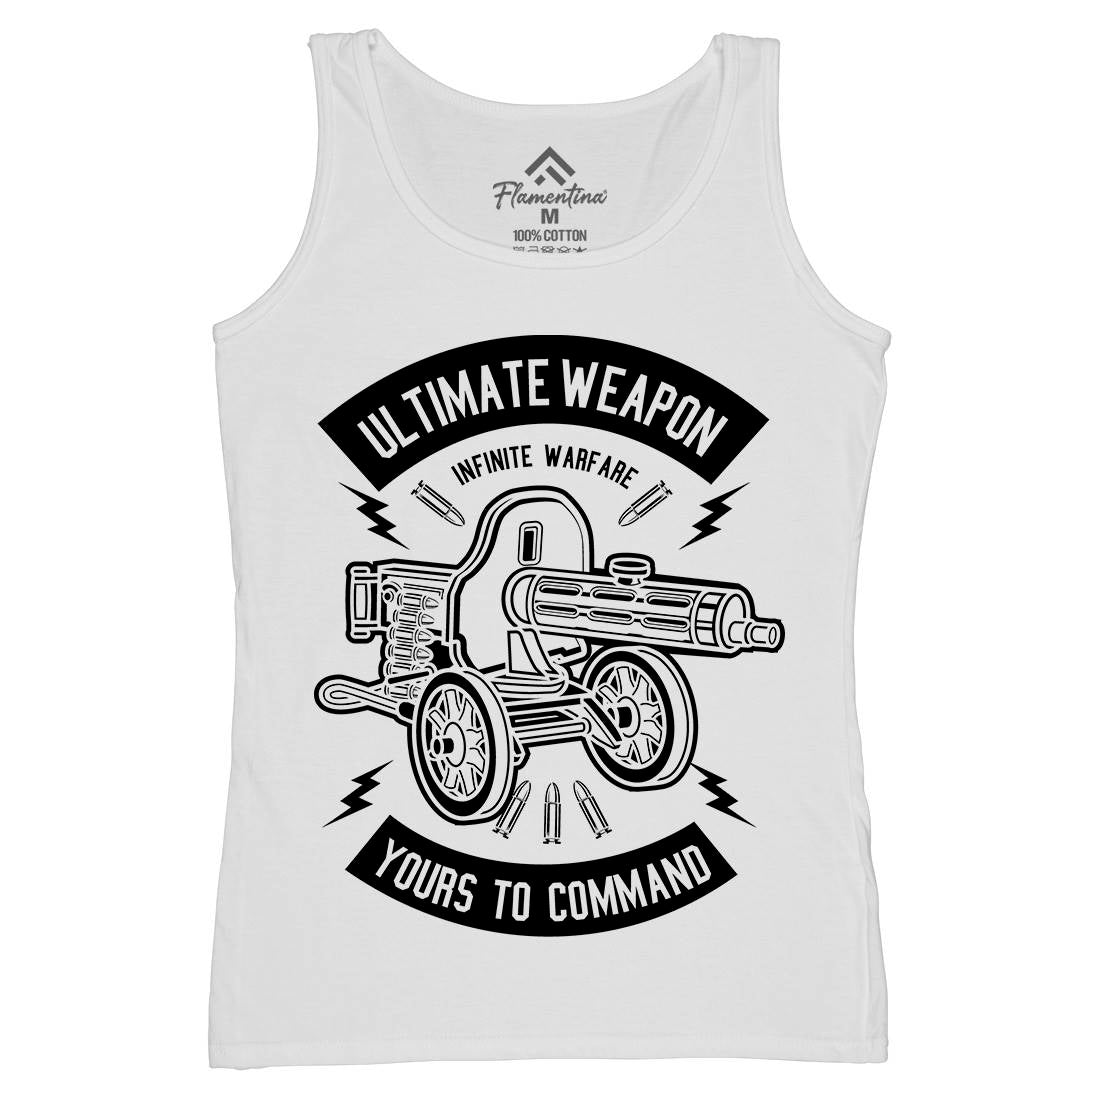 Ultimate Weapon Womens Organic Tank Top Vest Army B661